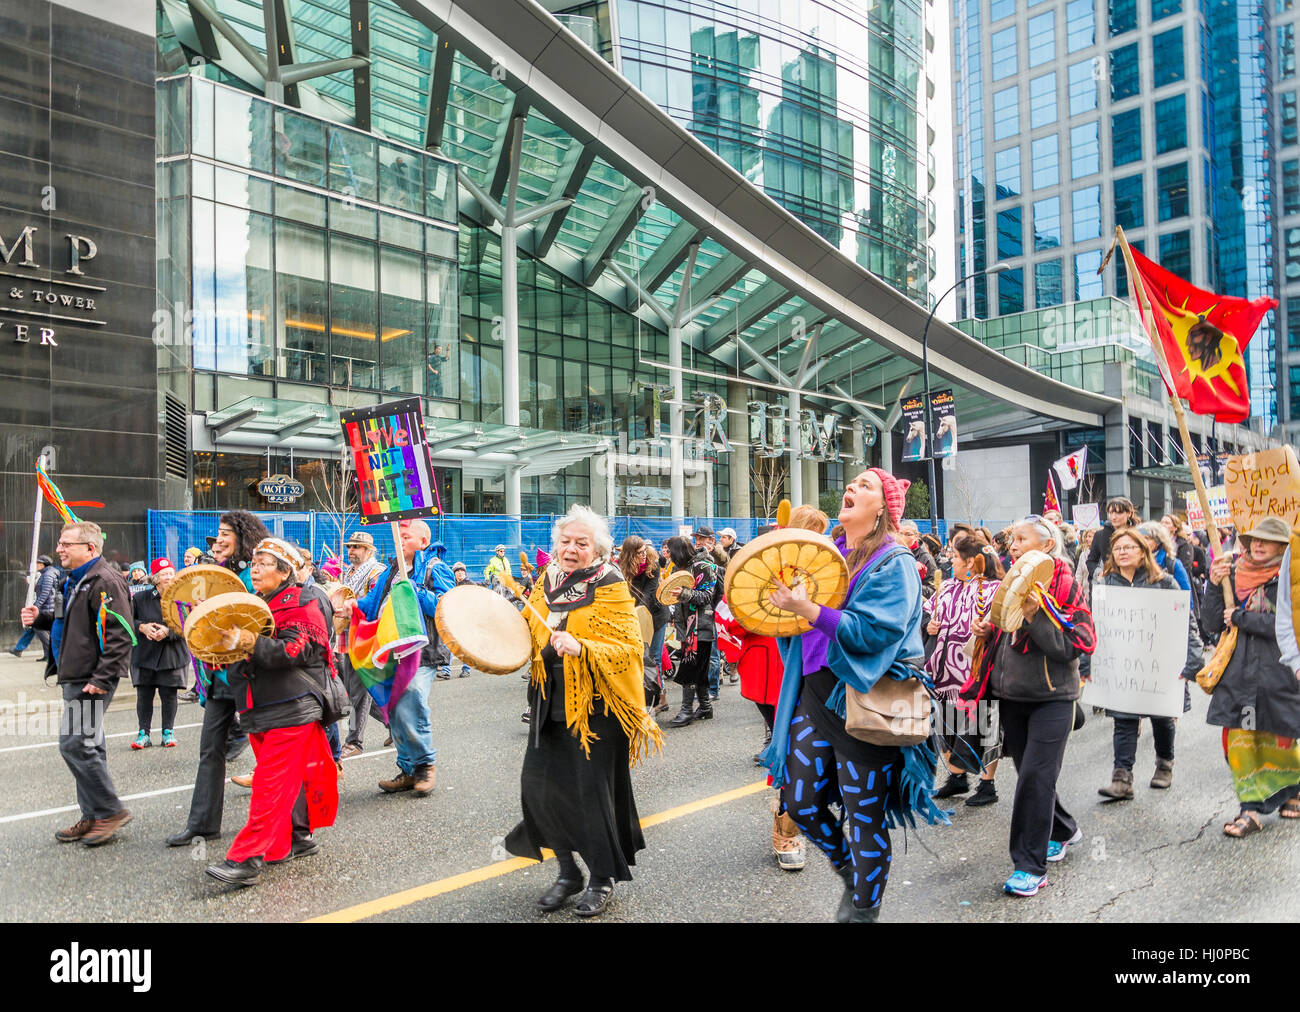 Vancouver, Canada. 21st Jan, 2017. Vancouver Womens March in front of the Trump Tower, Vancouver, British Columbia, Canada. Credit: Michael Wheatley/Alamy Live News Stock Photo